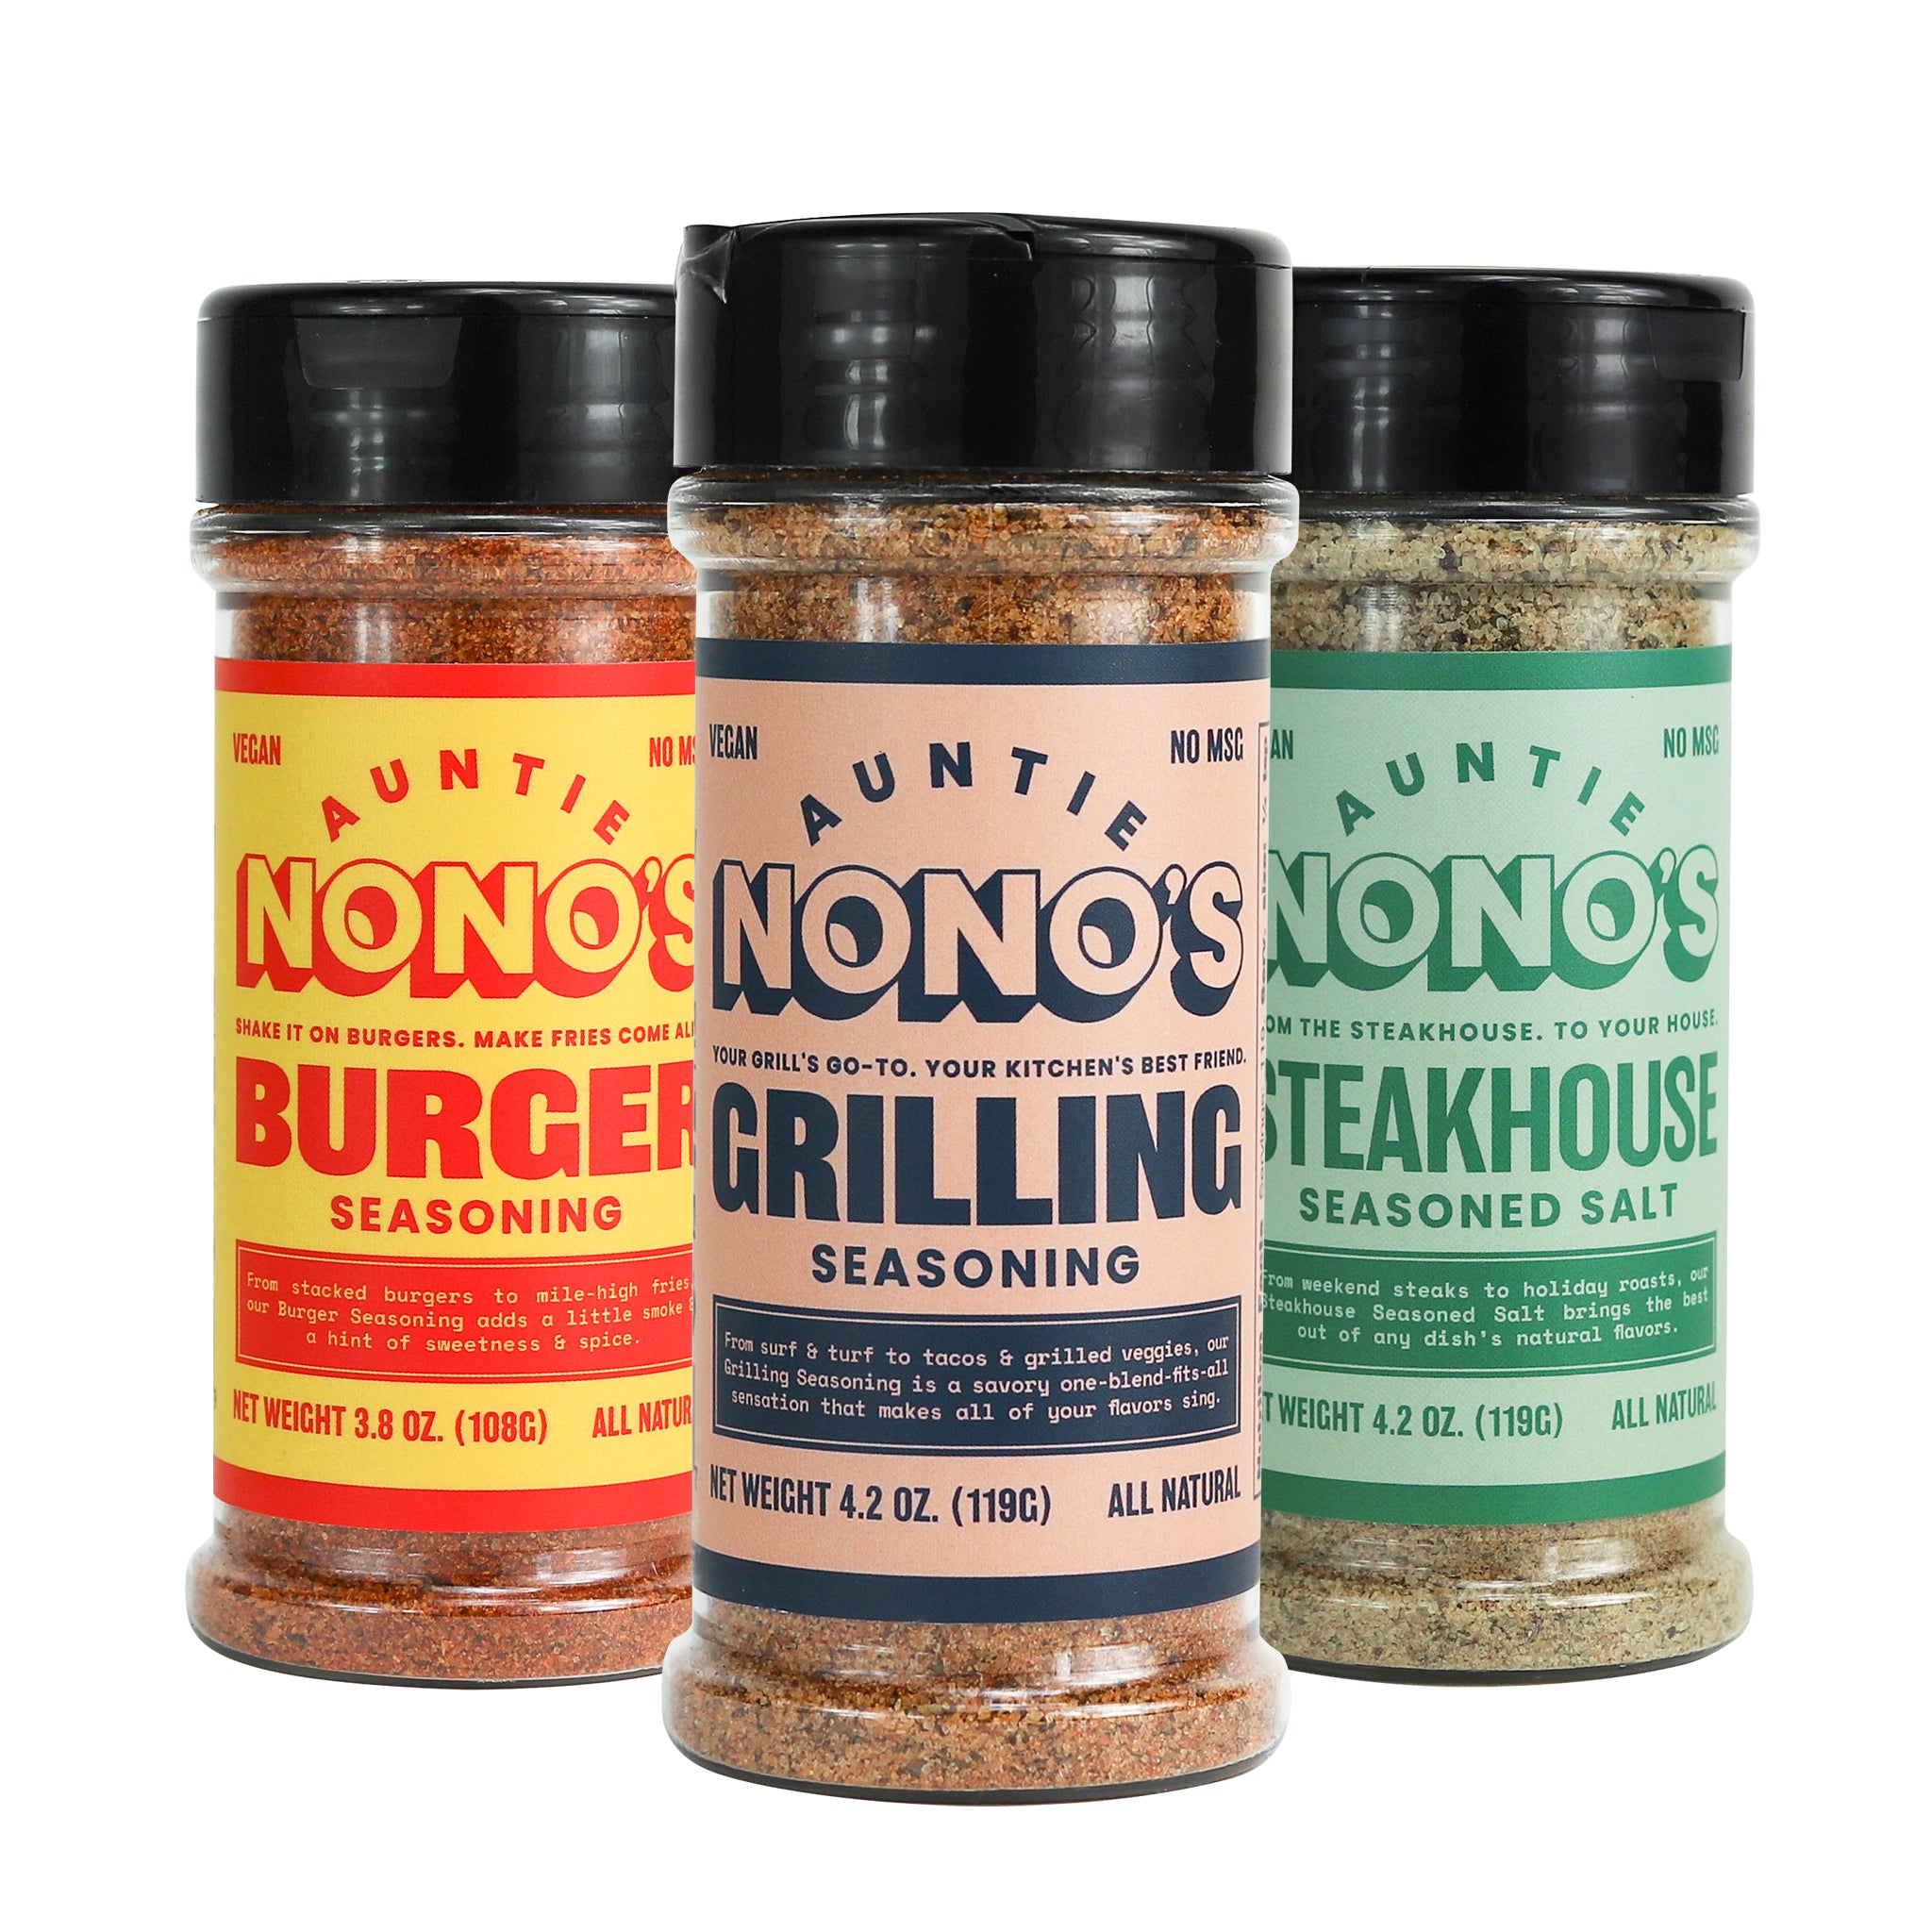 Three Ways to Make Your Cookout Juicy, Auntie Nono's Seasoning